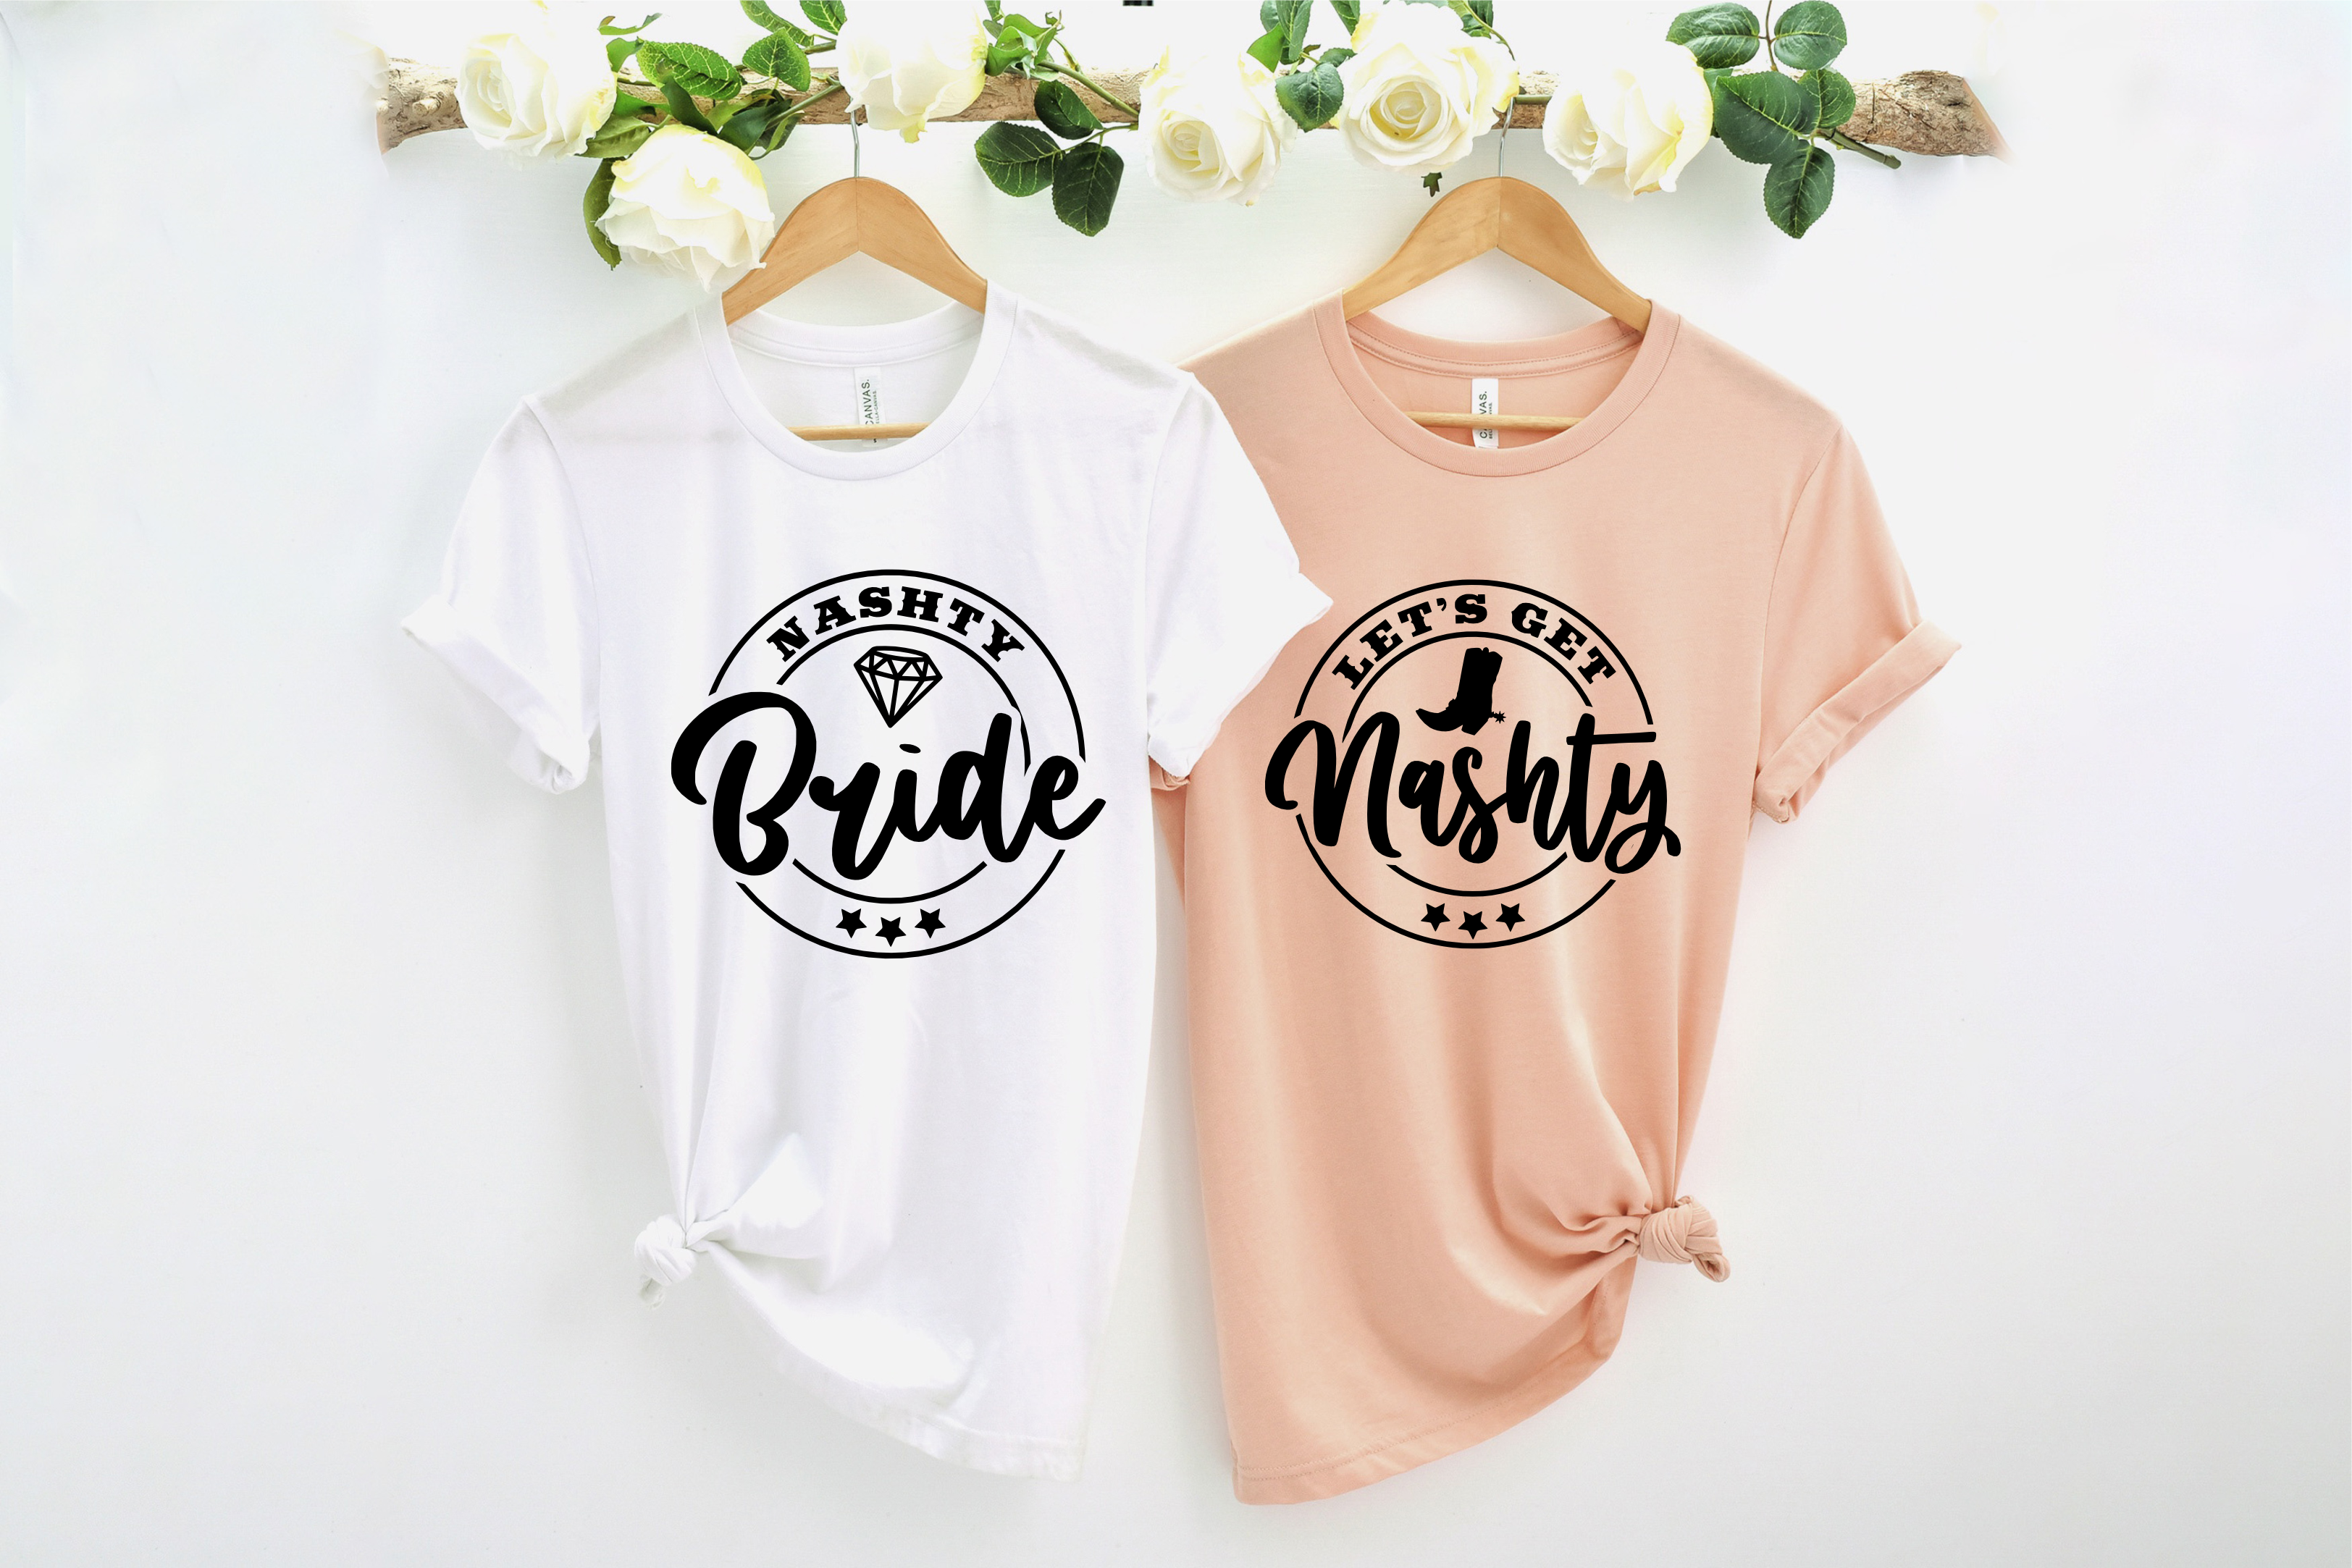 Nashty Bride or Let's get Nashty Bachelorette Shirts   - Commercially Printed Shirt - Fast Turn Around Time